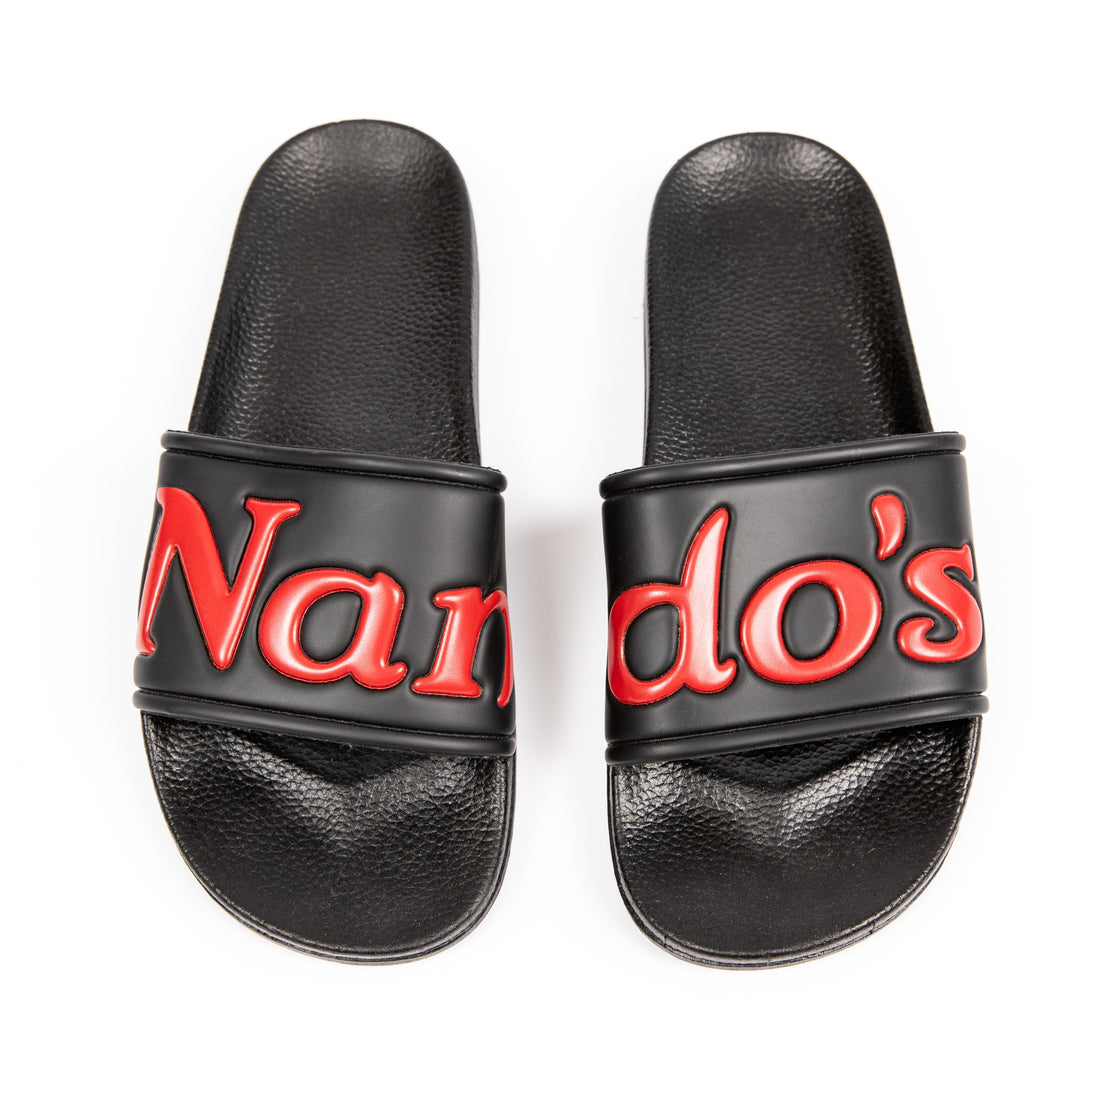 Black sliders featuring the Nando’s logo across the straps.